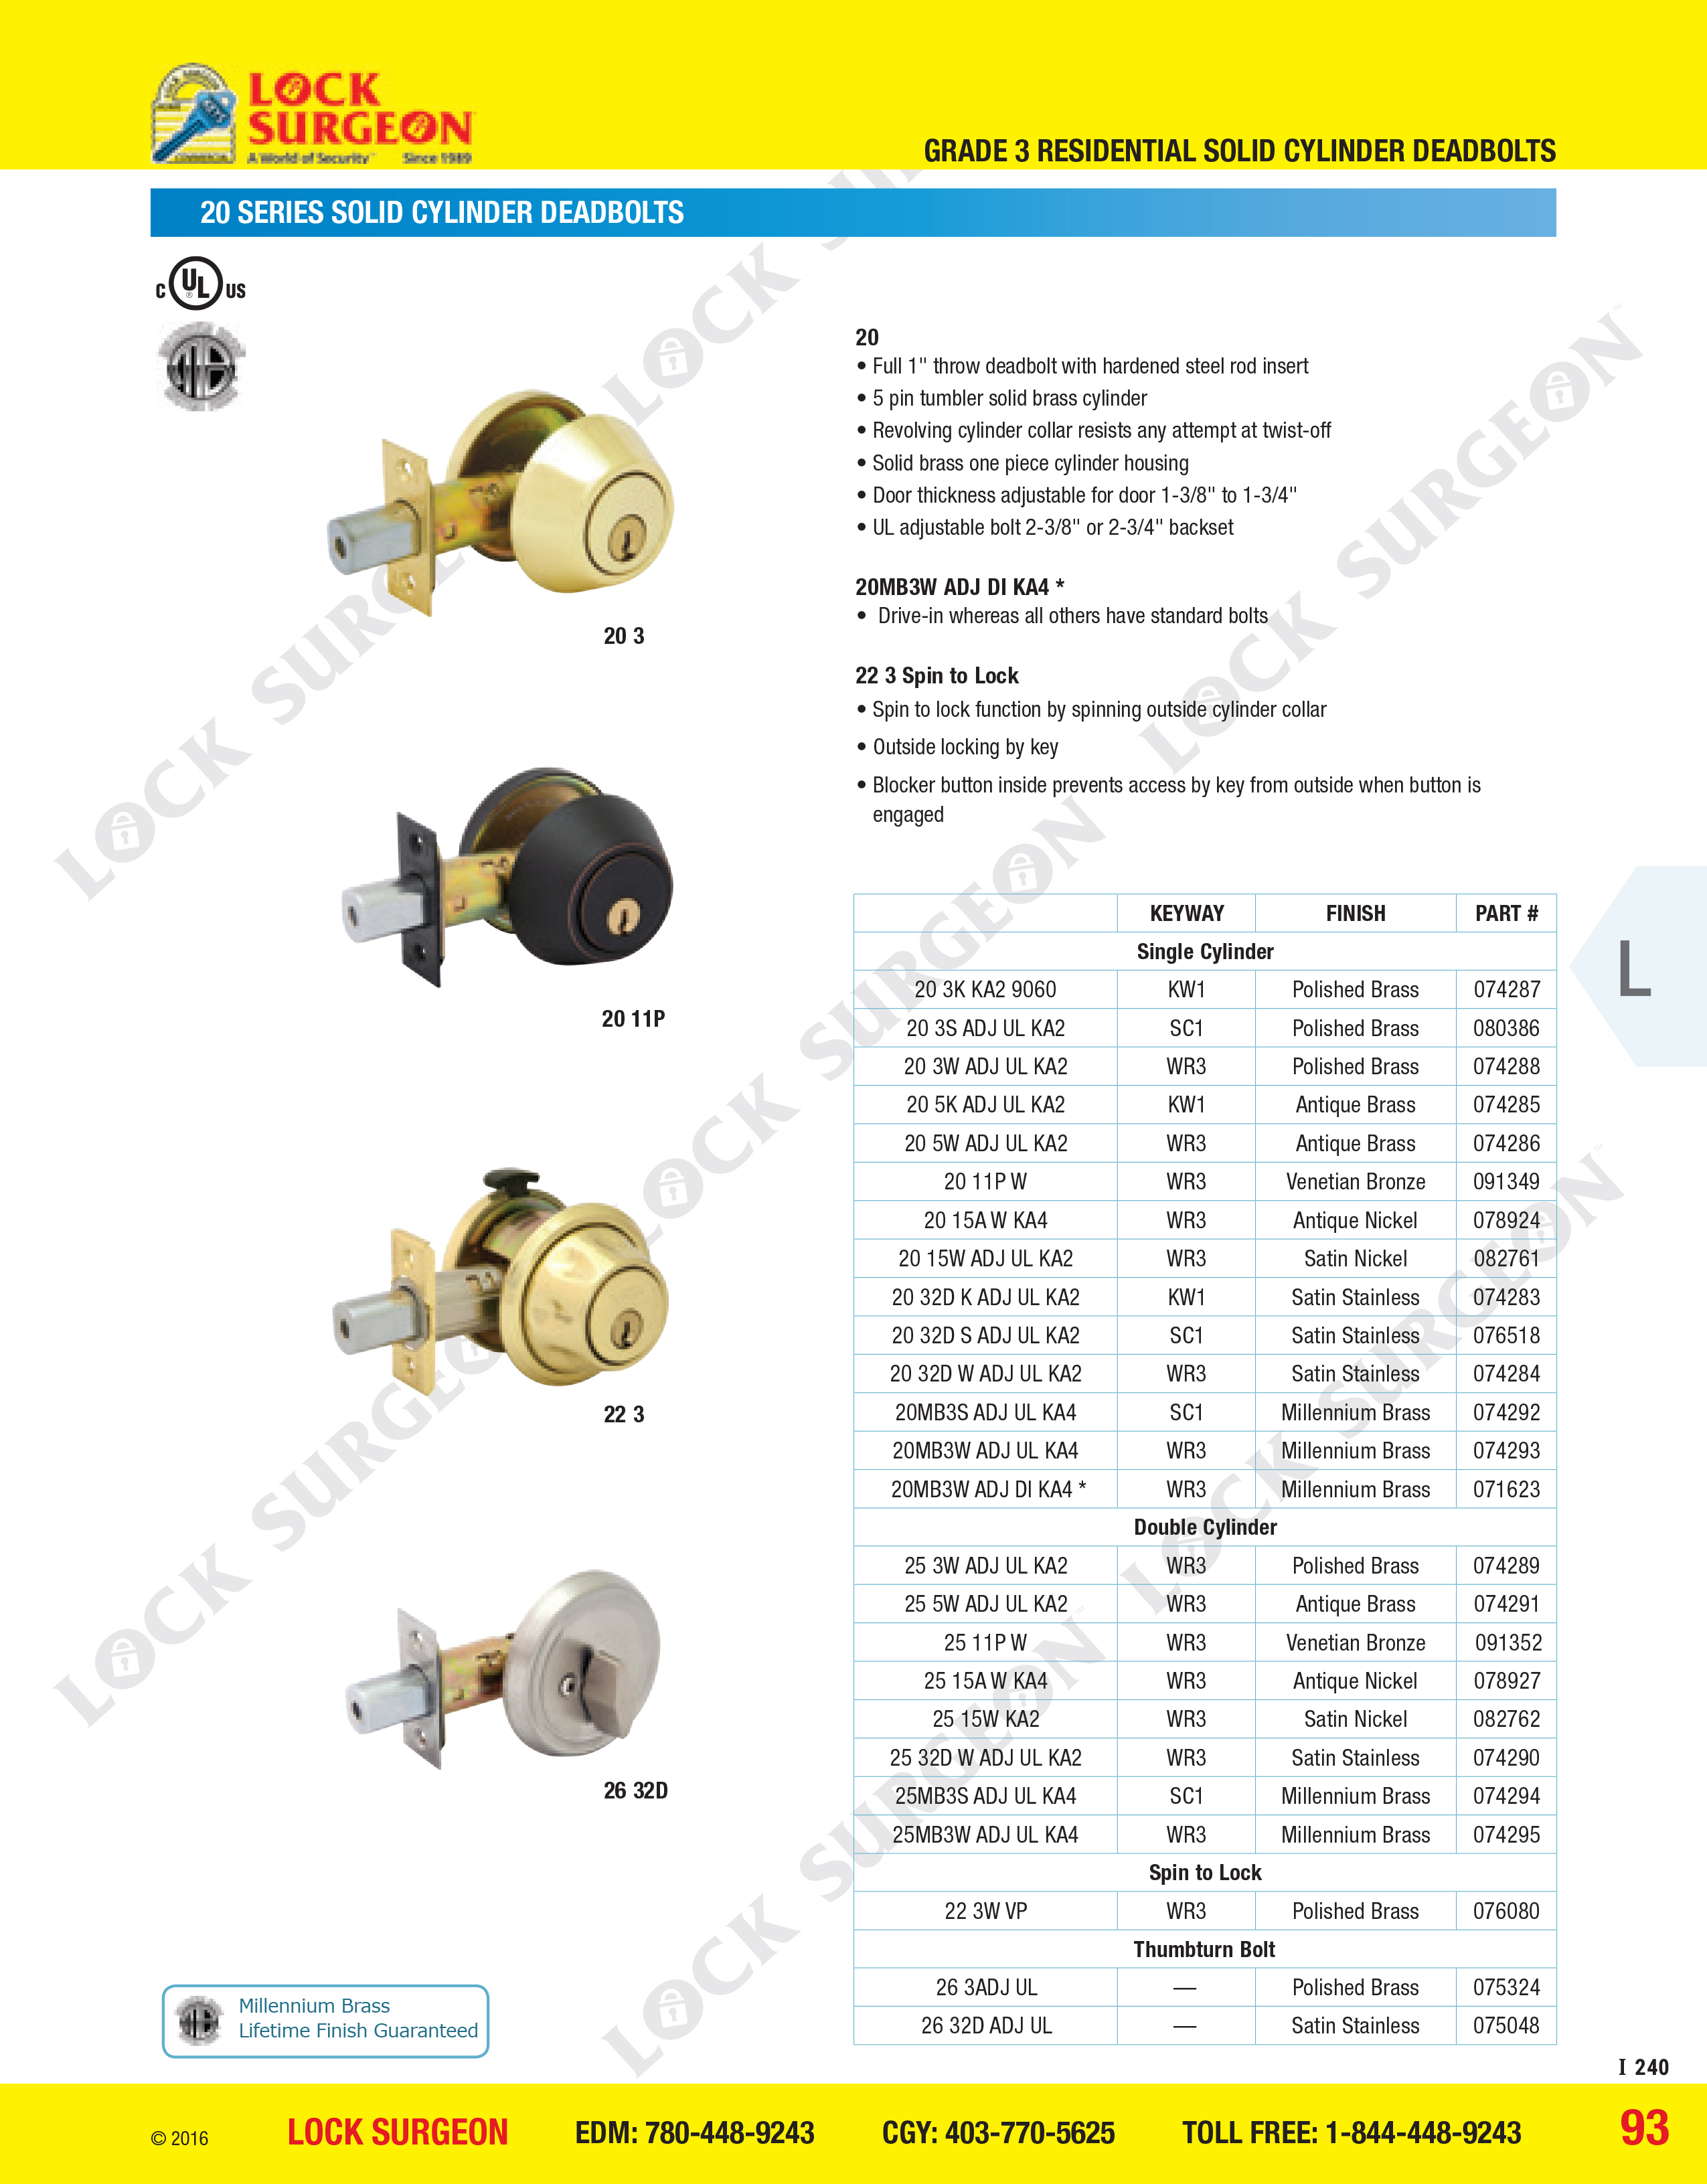 High grade deadbolts single-sided cylinder or double-sided cylinder